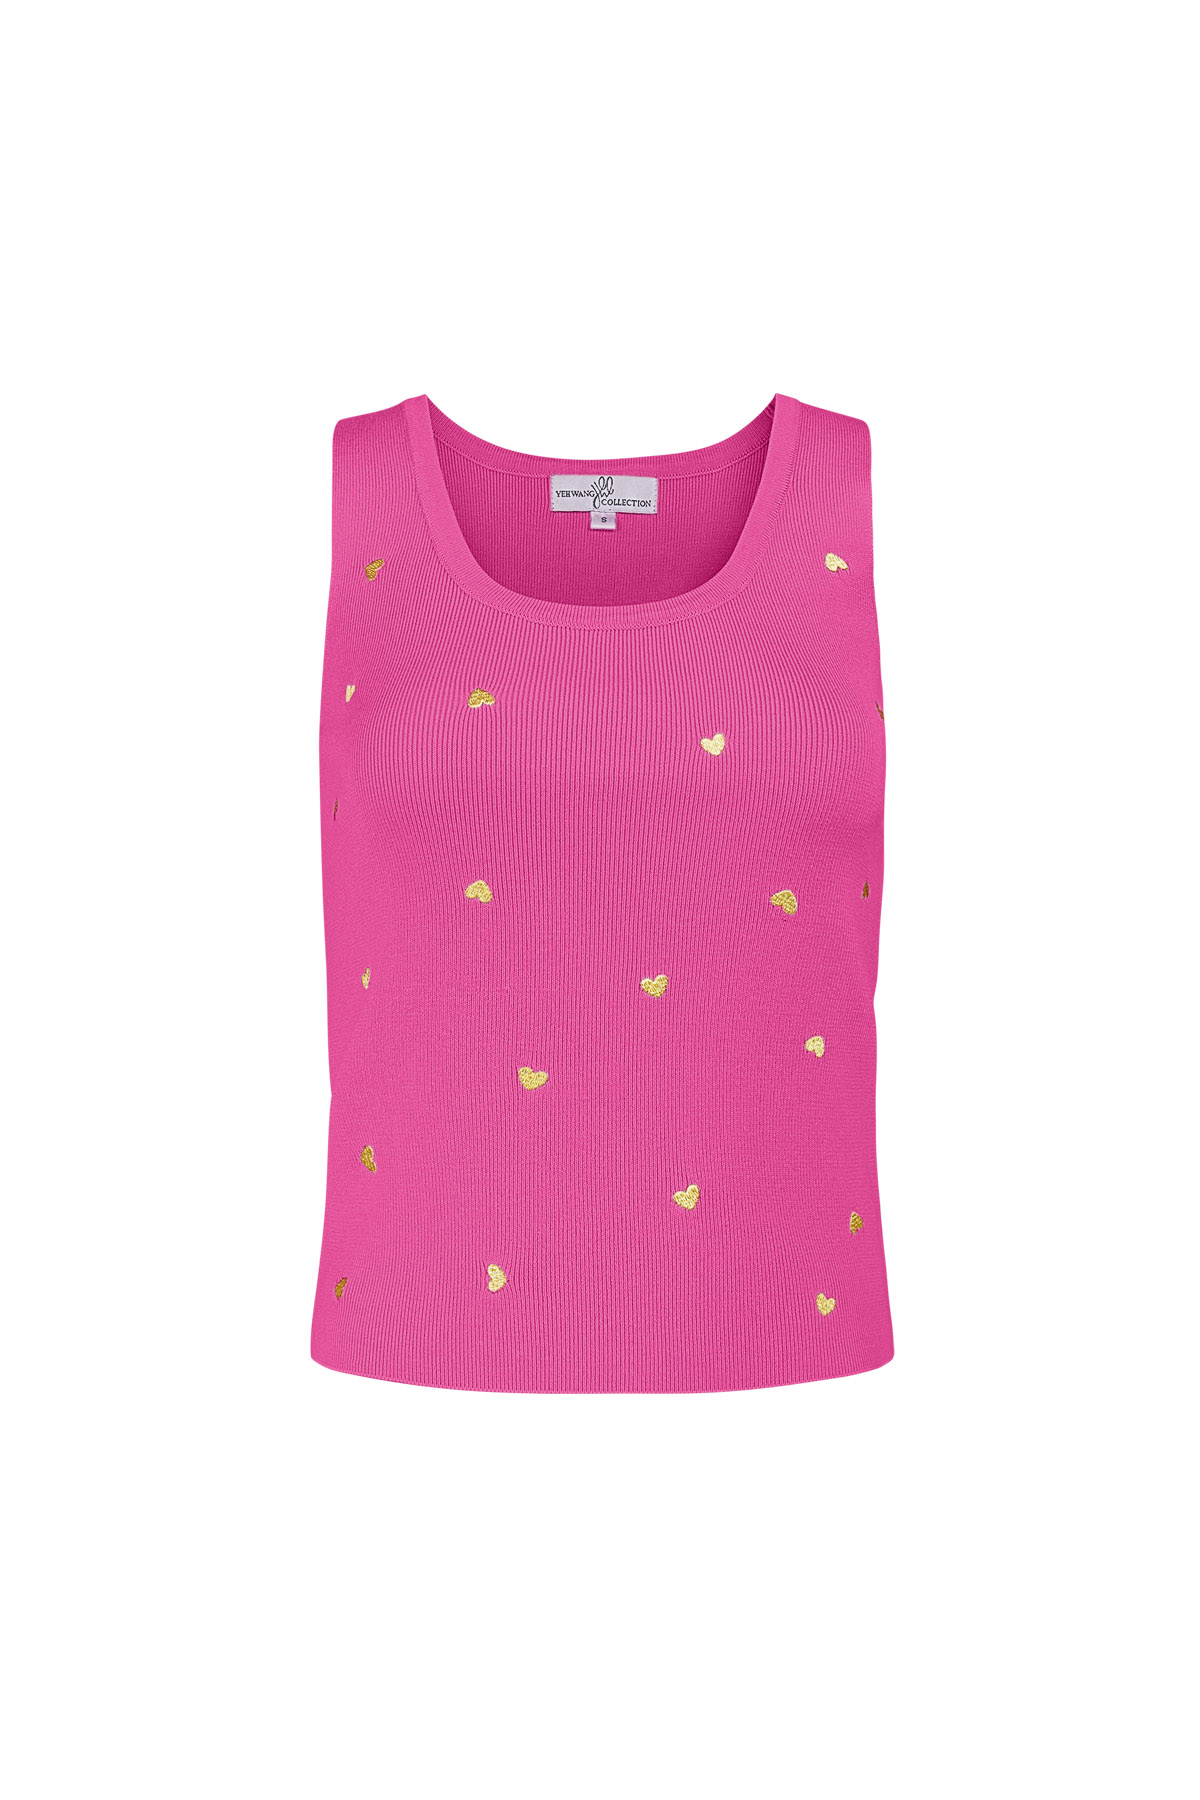 Sleeveless top with gold heart details large – pink